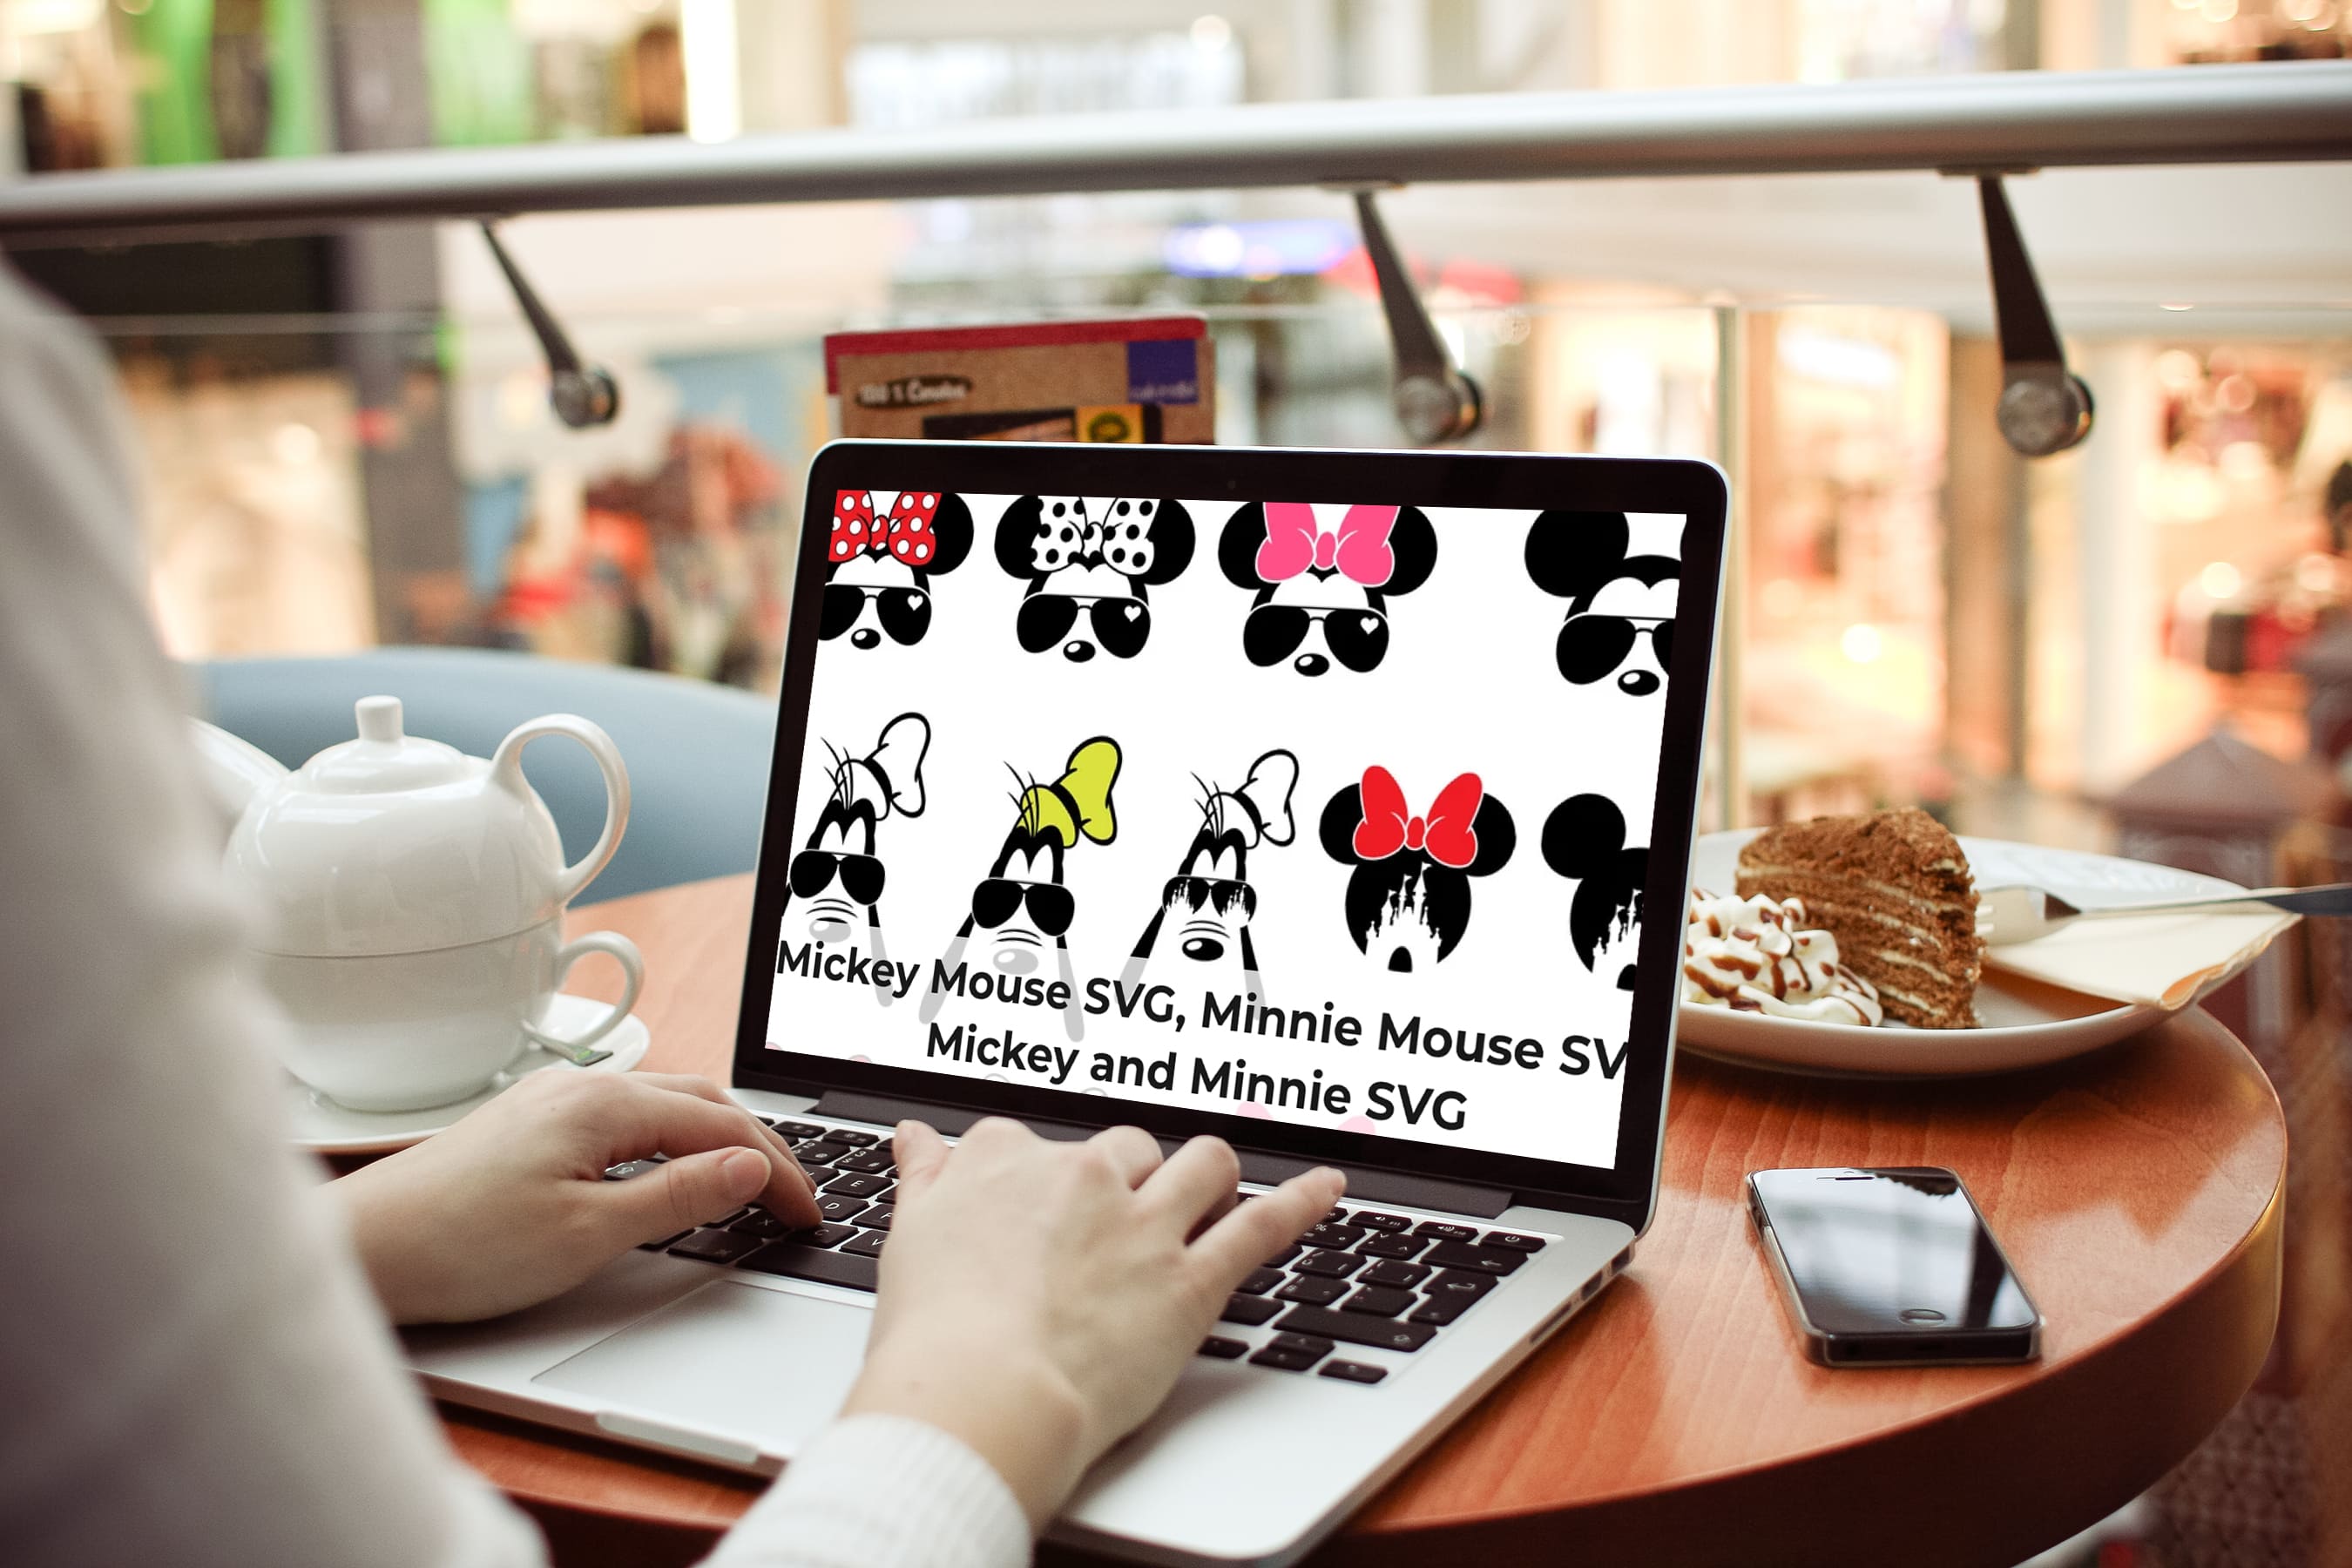 Laptop - Mickey and Minnie SVG.